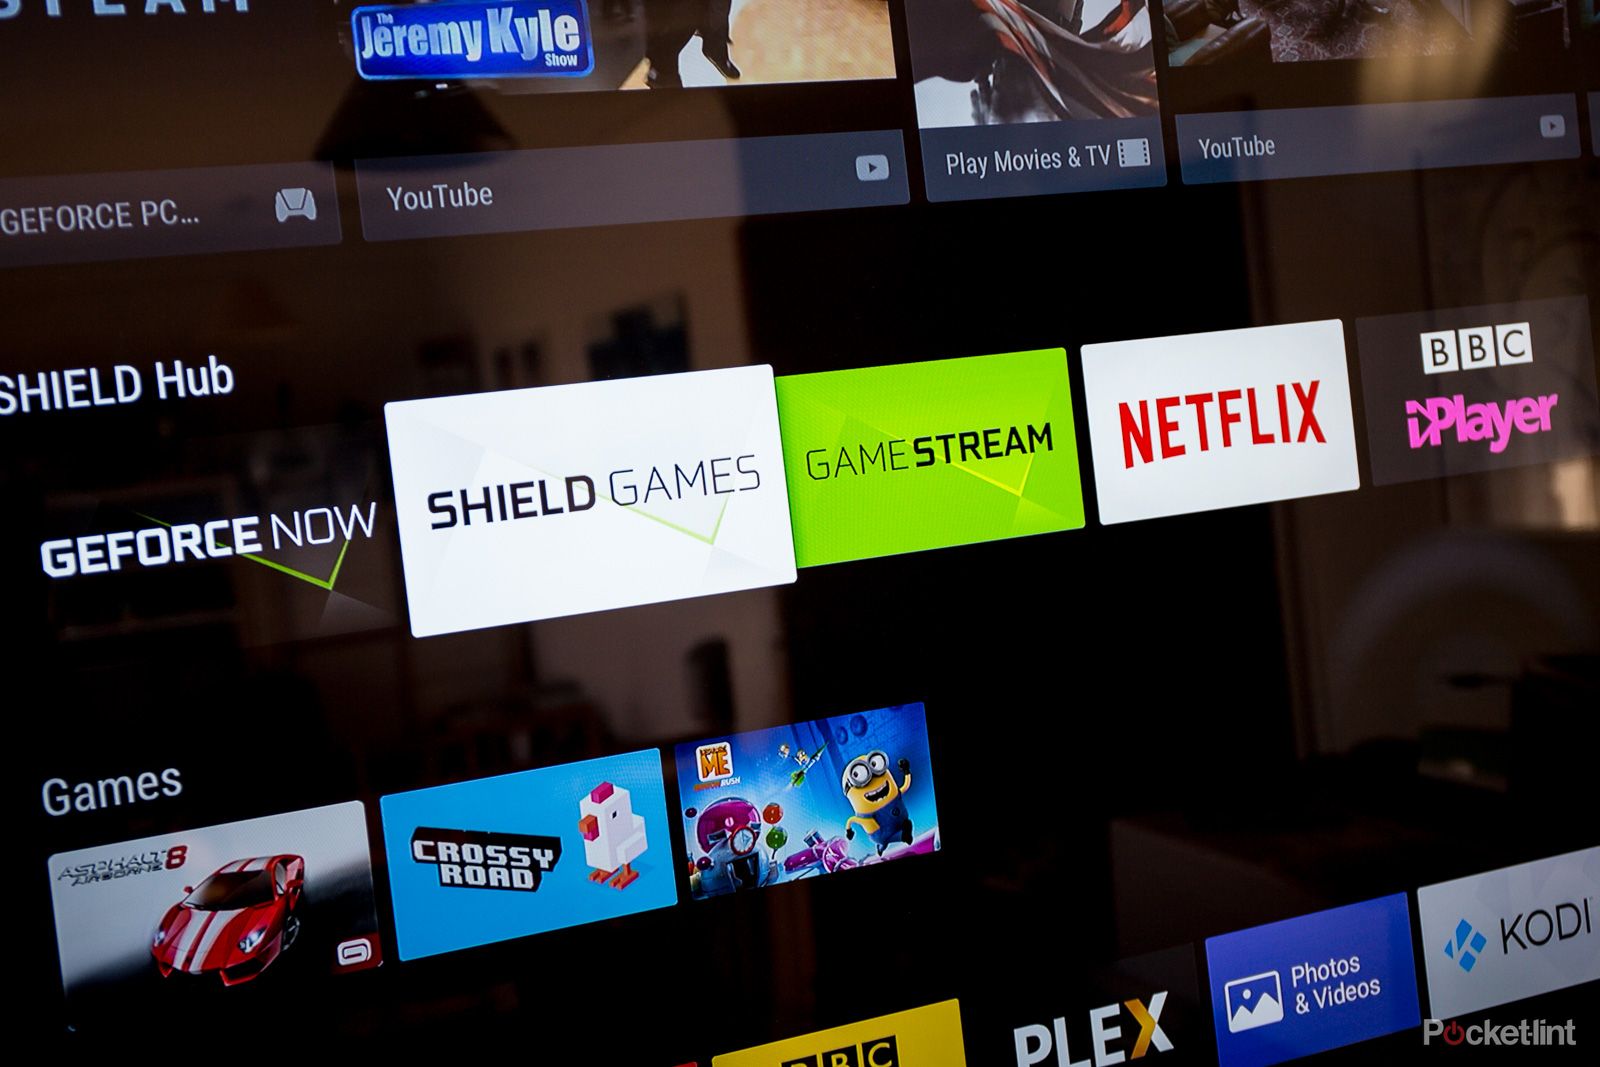 nvidia shield android tv review image 19